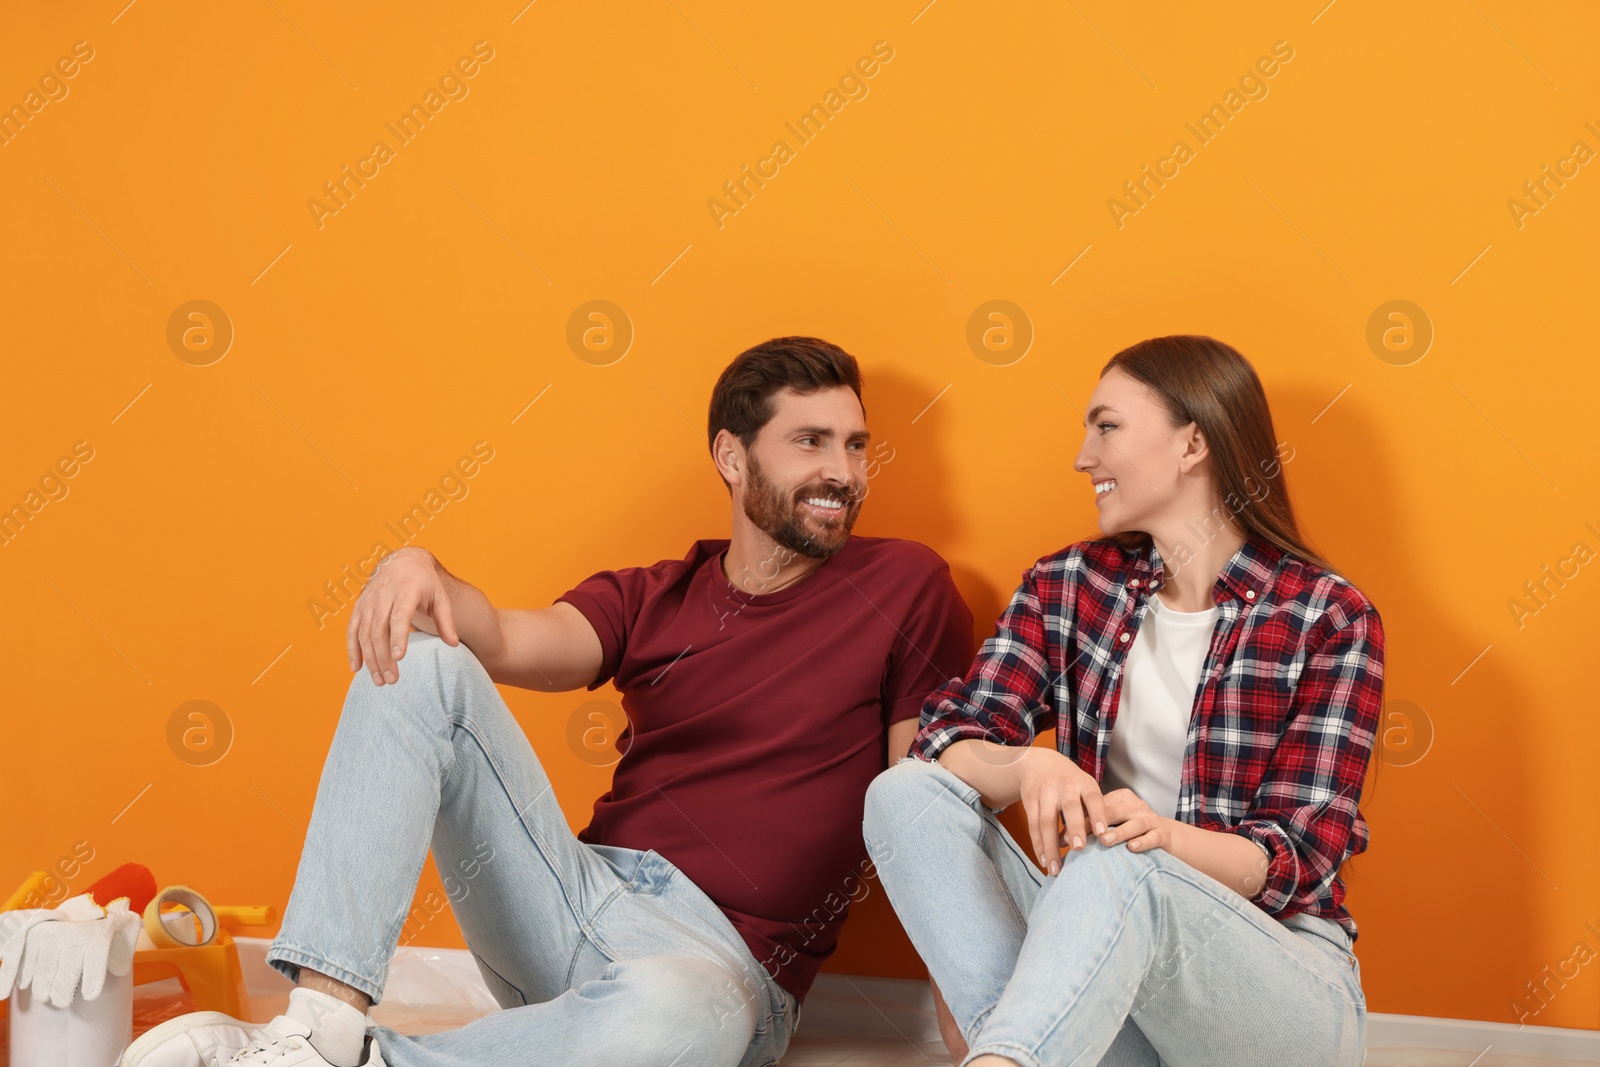 Photo of Happy designers sitting on floor with painting equipment near freshly painted orange wall indoors